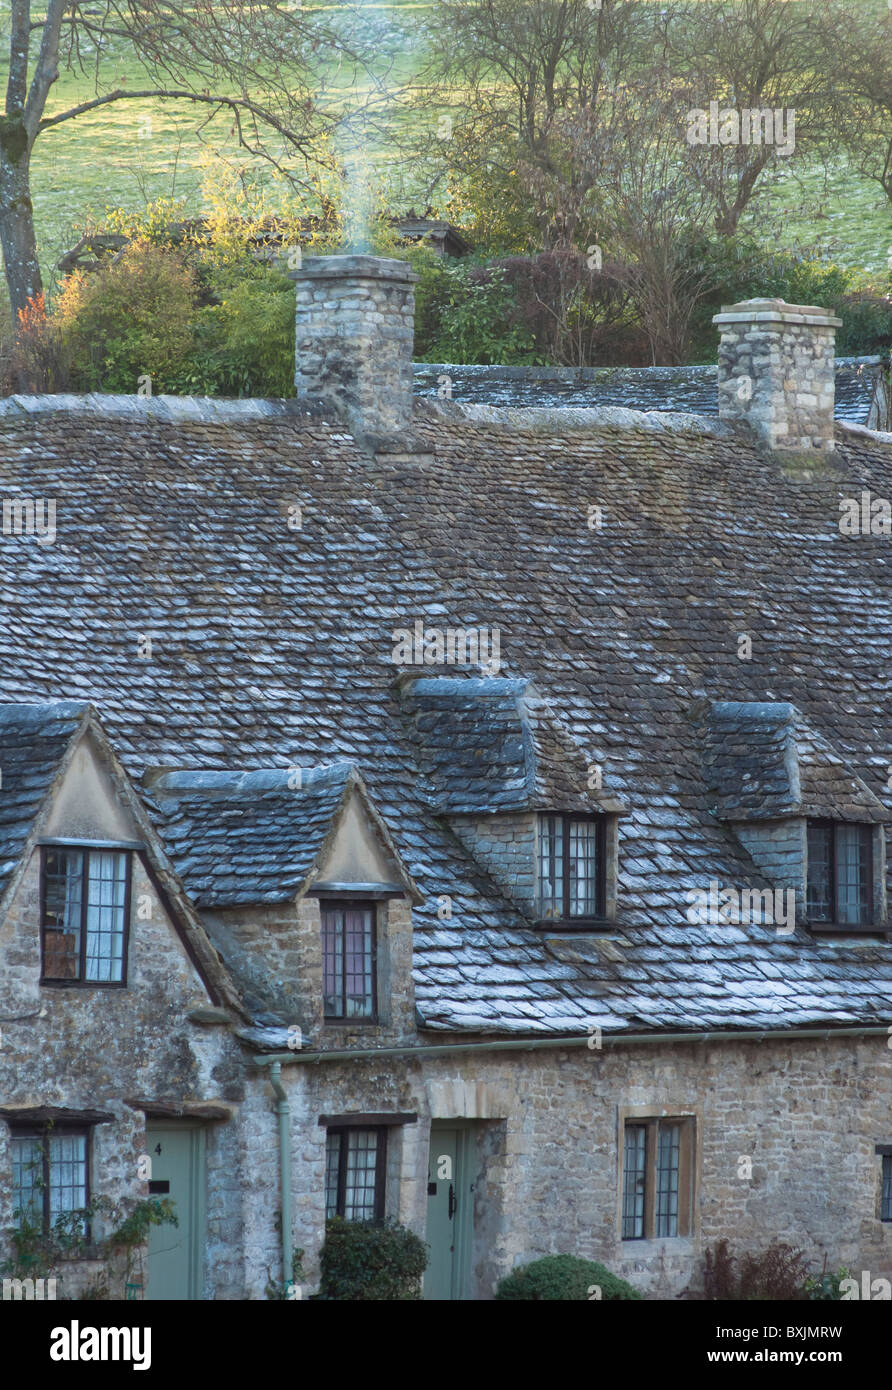 Arlington Row - 17th century weavers cottages, built in Cotswold stone, in the picturesque village of Bibury, Gloucestershire UK Stock Photo